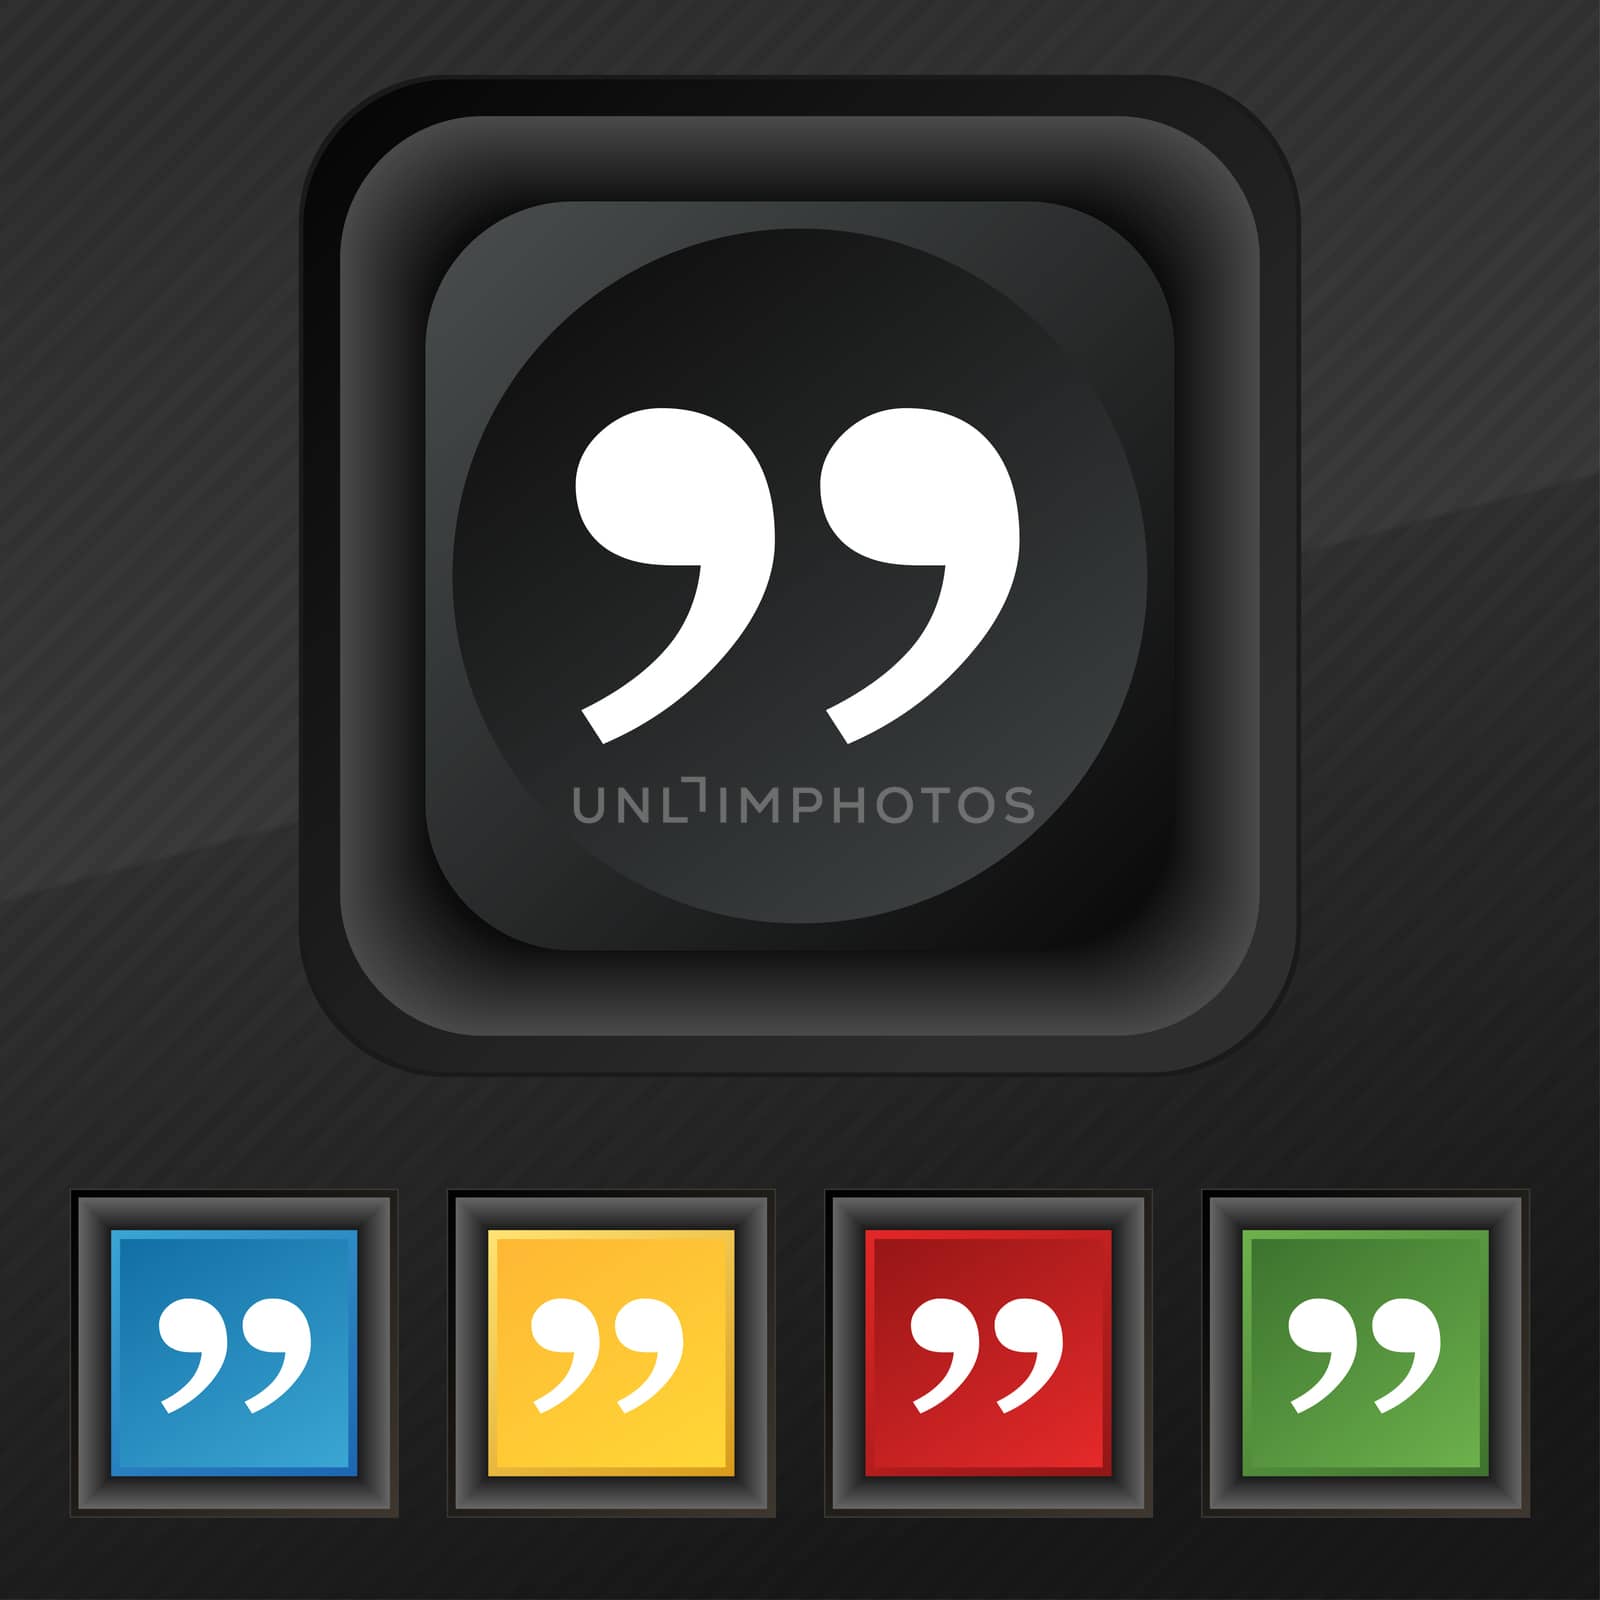 Double quotes at the end of words icon symbol. Set of five colorful, stylish buttons on black texture for your design. illustration